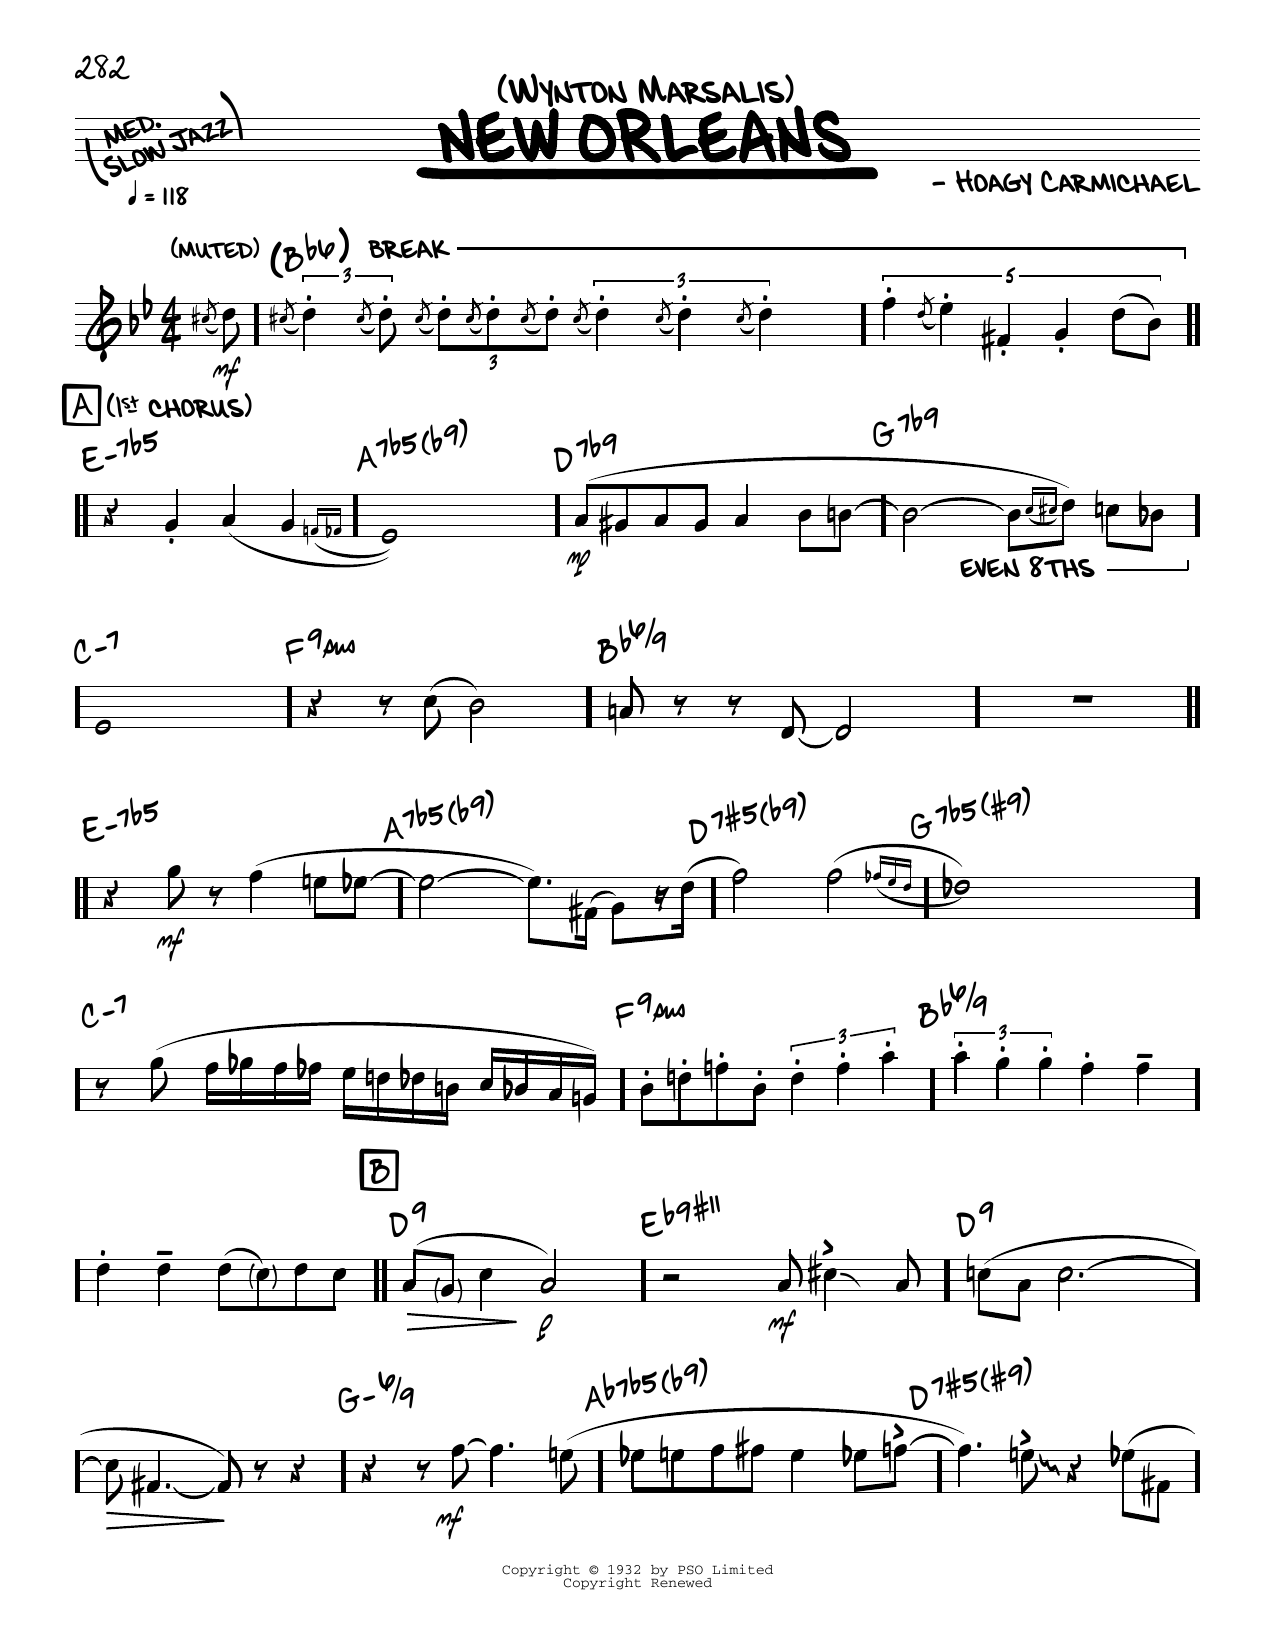 Download Wynton Marsalis New Orleans (solo only) Sheet Music